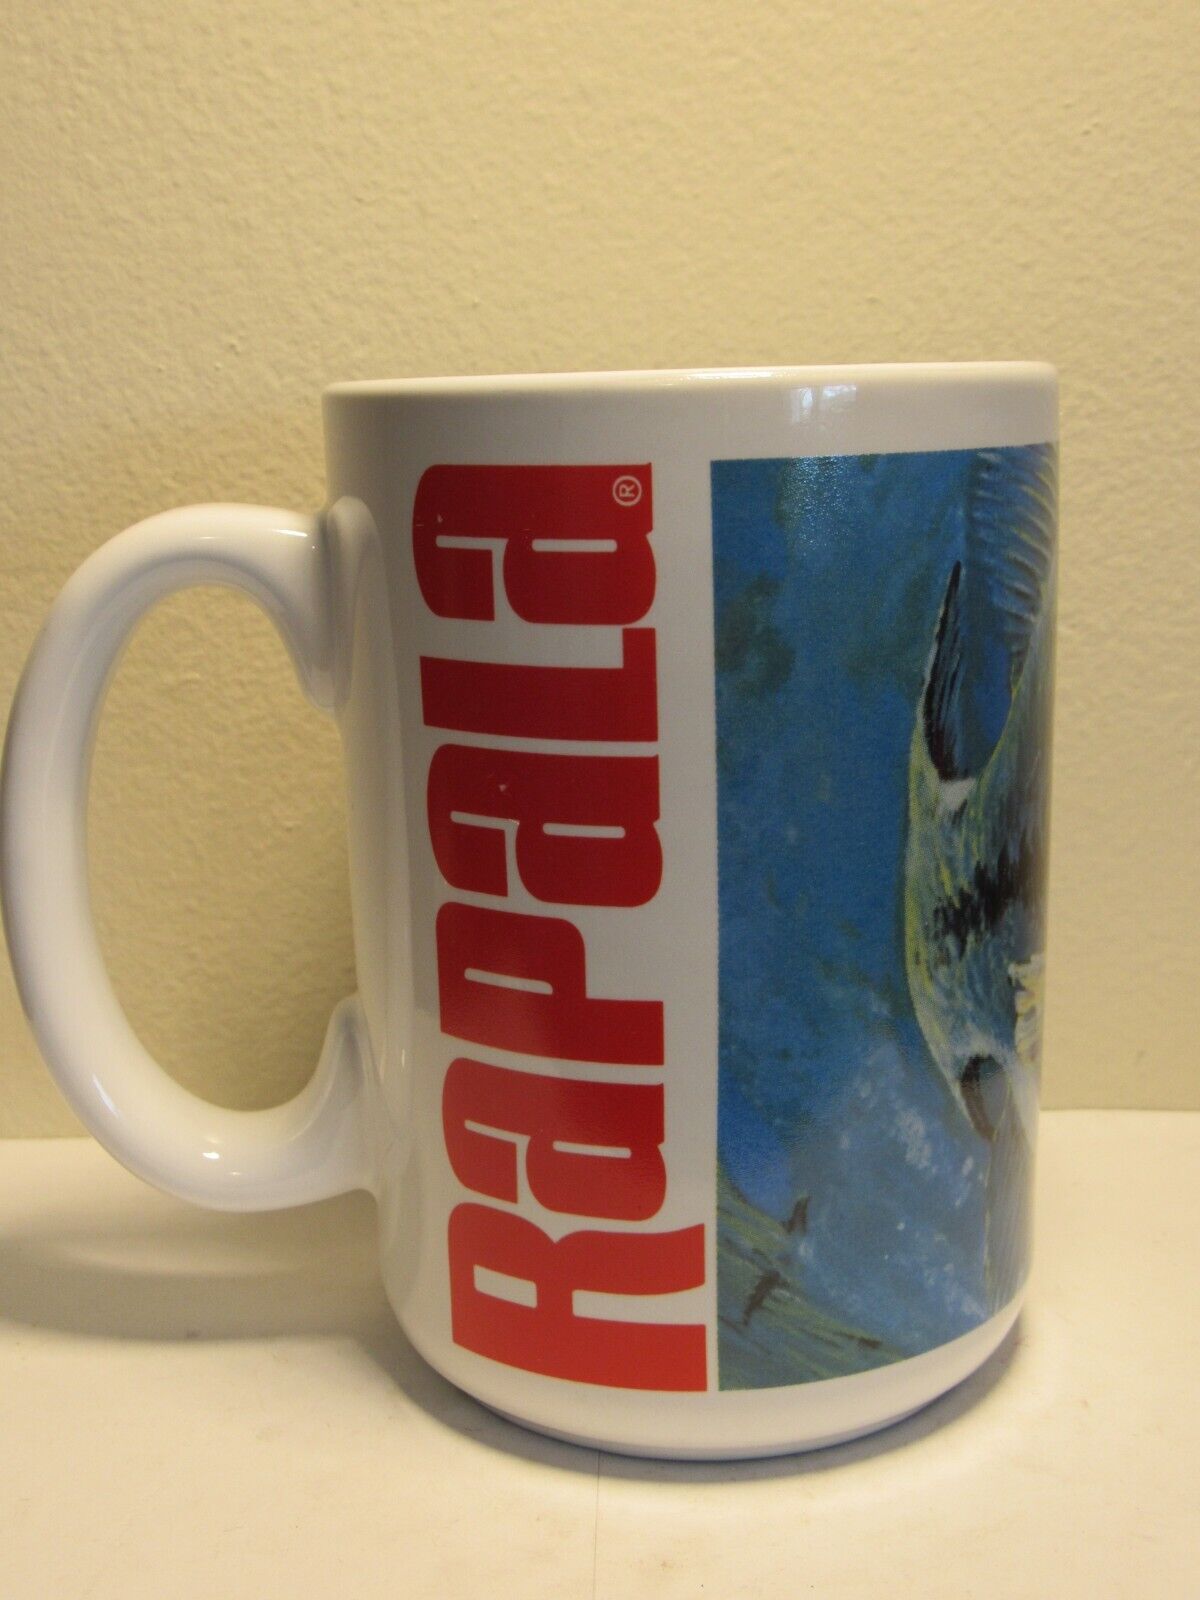 Rapala Large Mouth Bass Coffee Cup...Ready to Hit the Lure